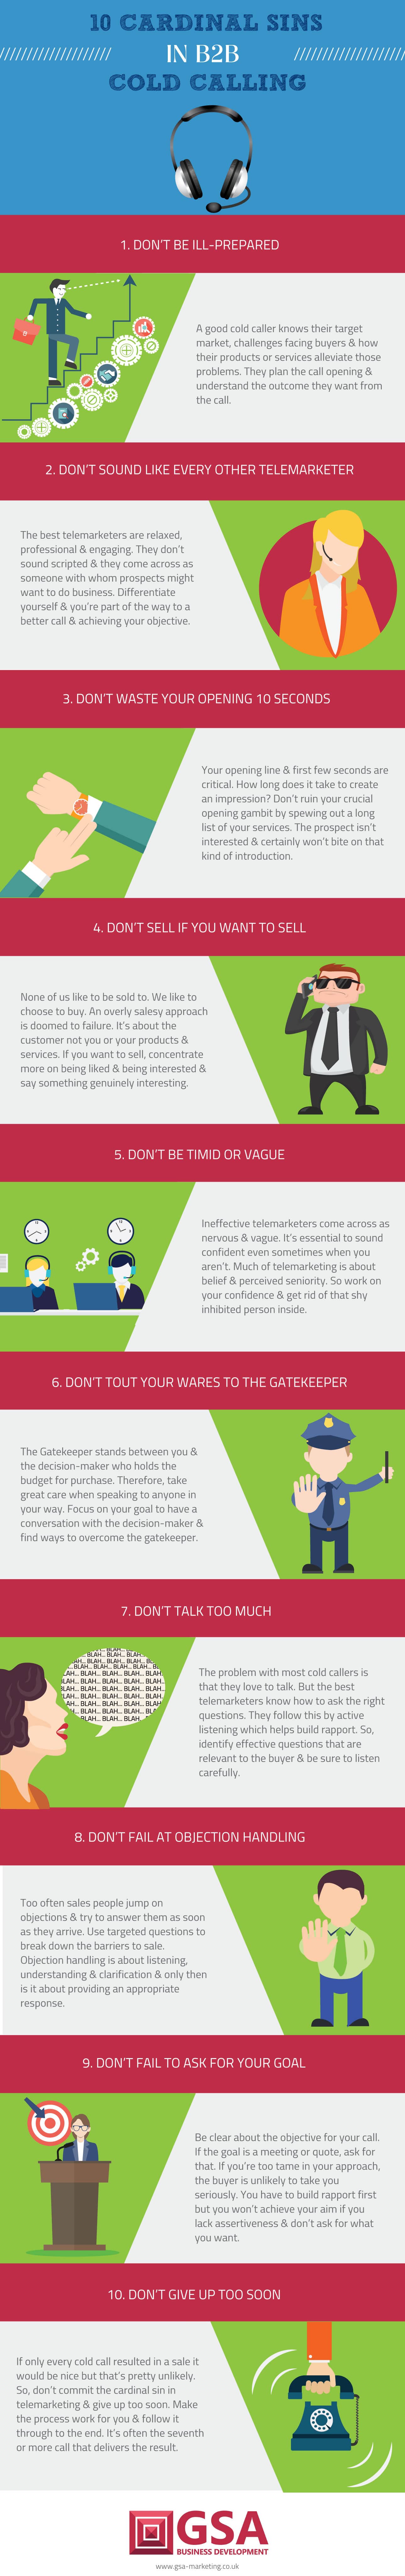 10 Cold Calling Cardinal Sins Infographic